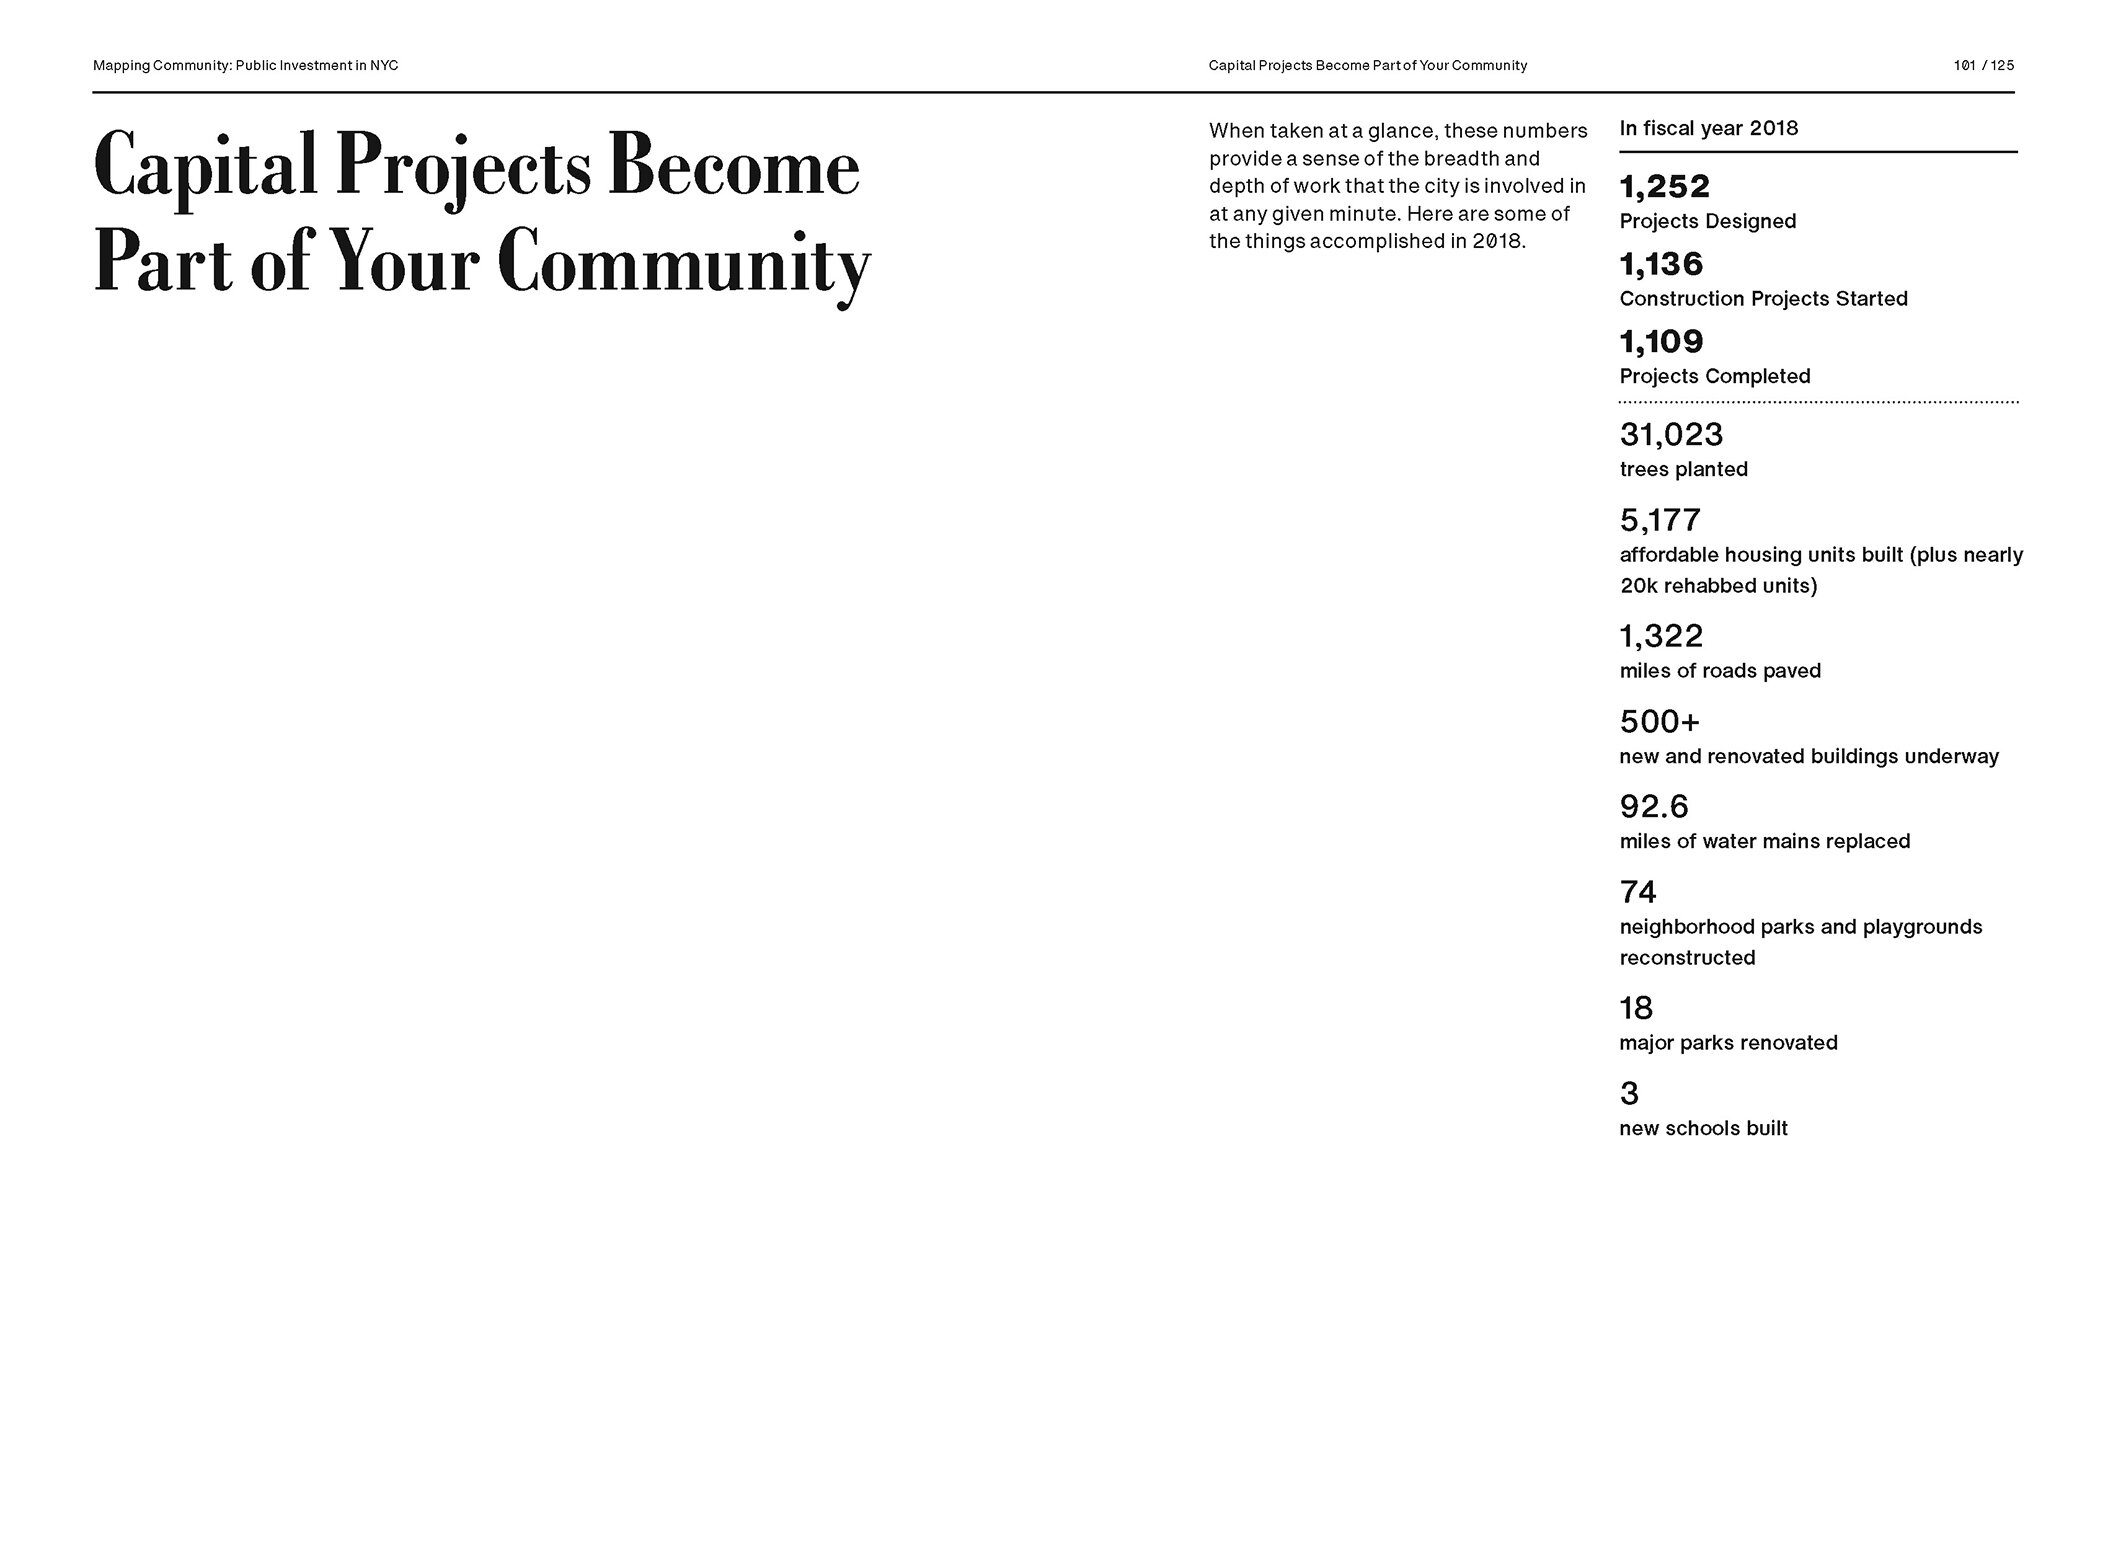 MAPPING COMMUNITY EXHIBT CATALOG_Page_51.jpg